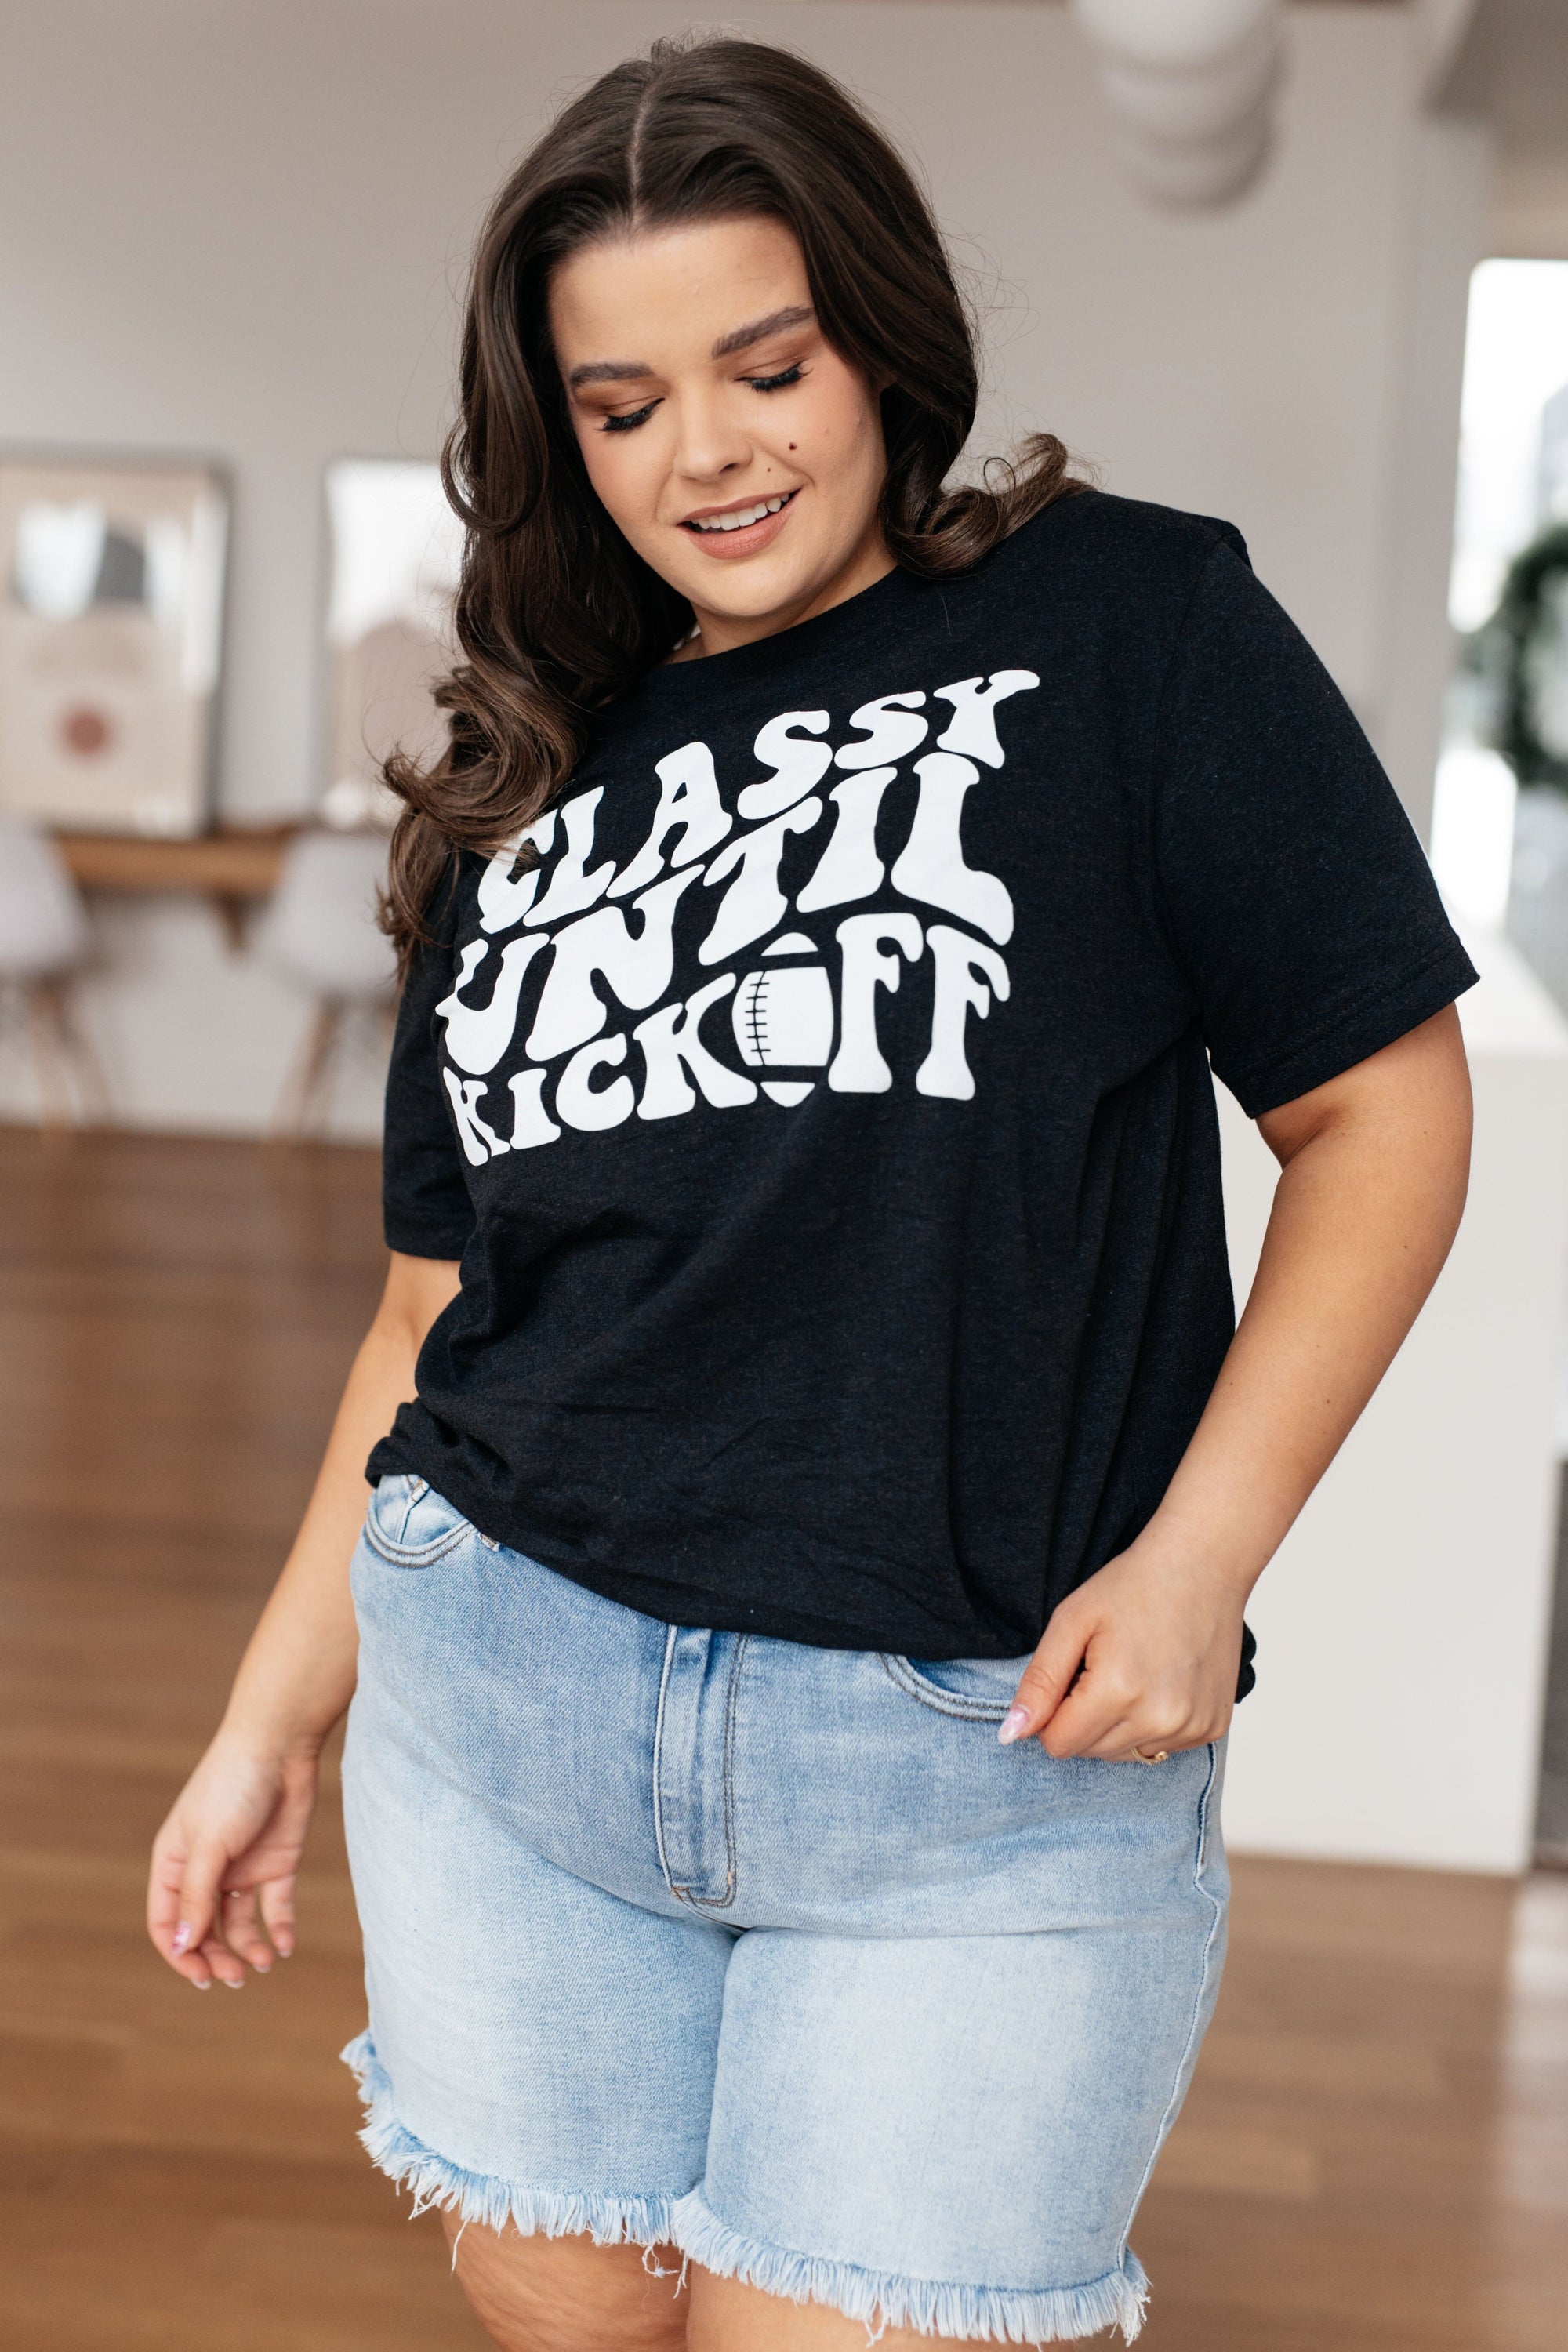 Classy Until Kickoff Tee Womens Ave Shops 